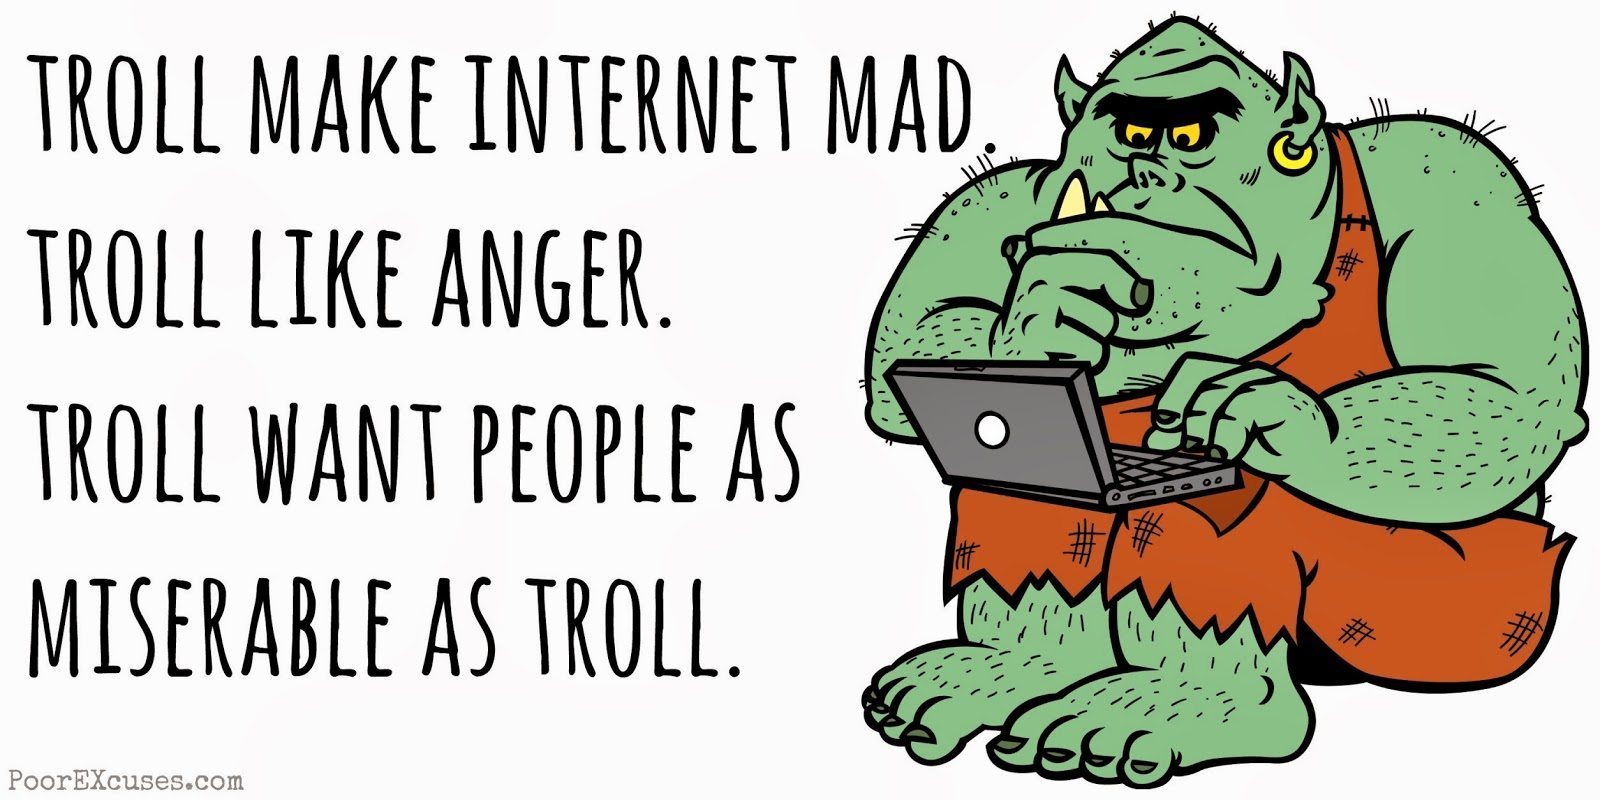 TOP DEFINITION anti troll a person who apposes trolls by playing into their  game, then keeps